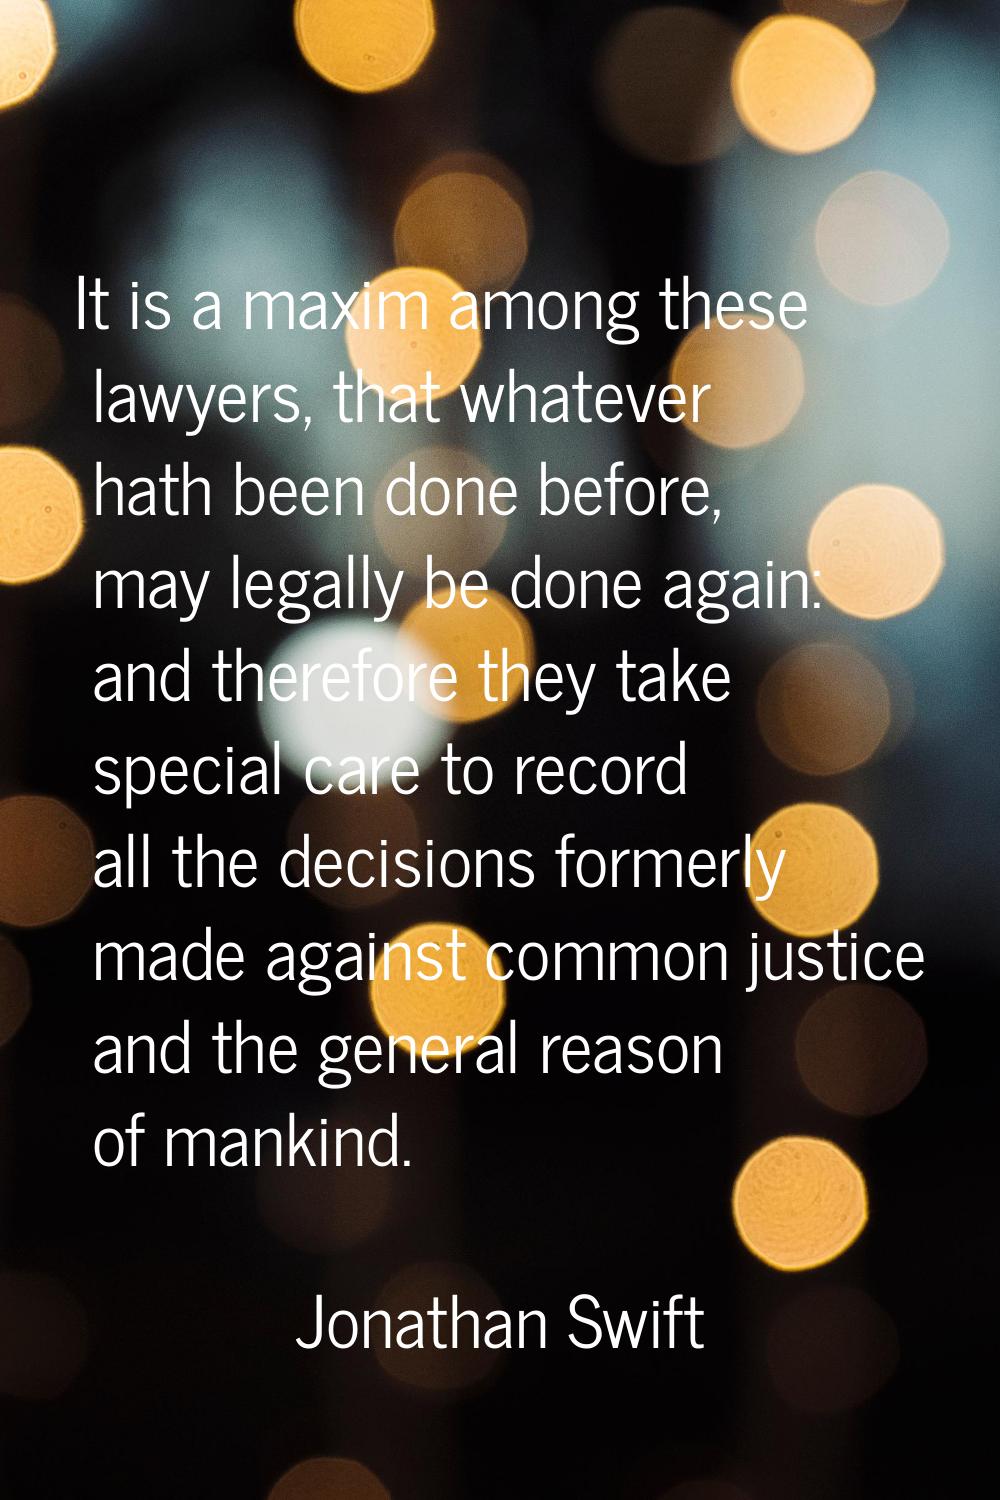 It is a maxim among these lawyers, that whatever hath been done before, may legally be done again: 